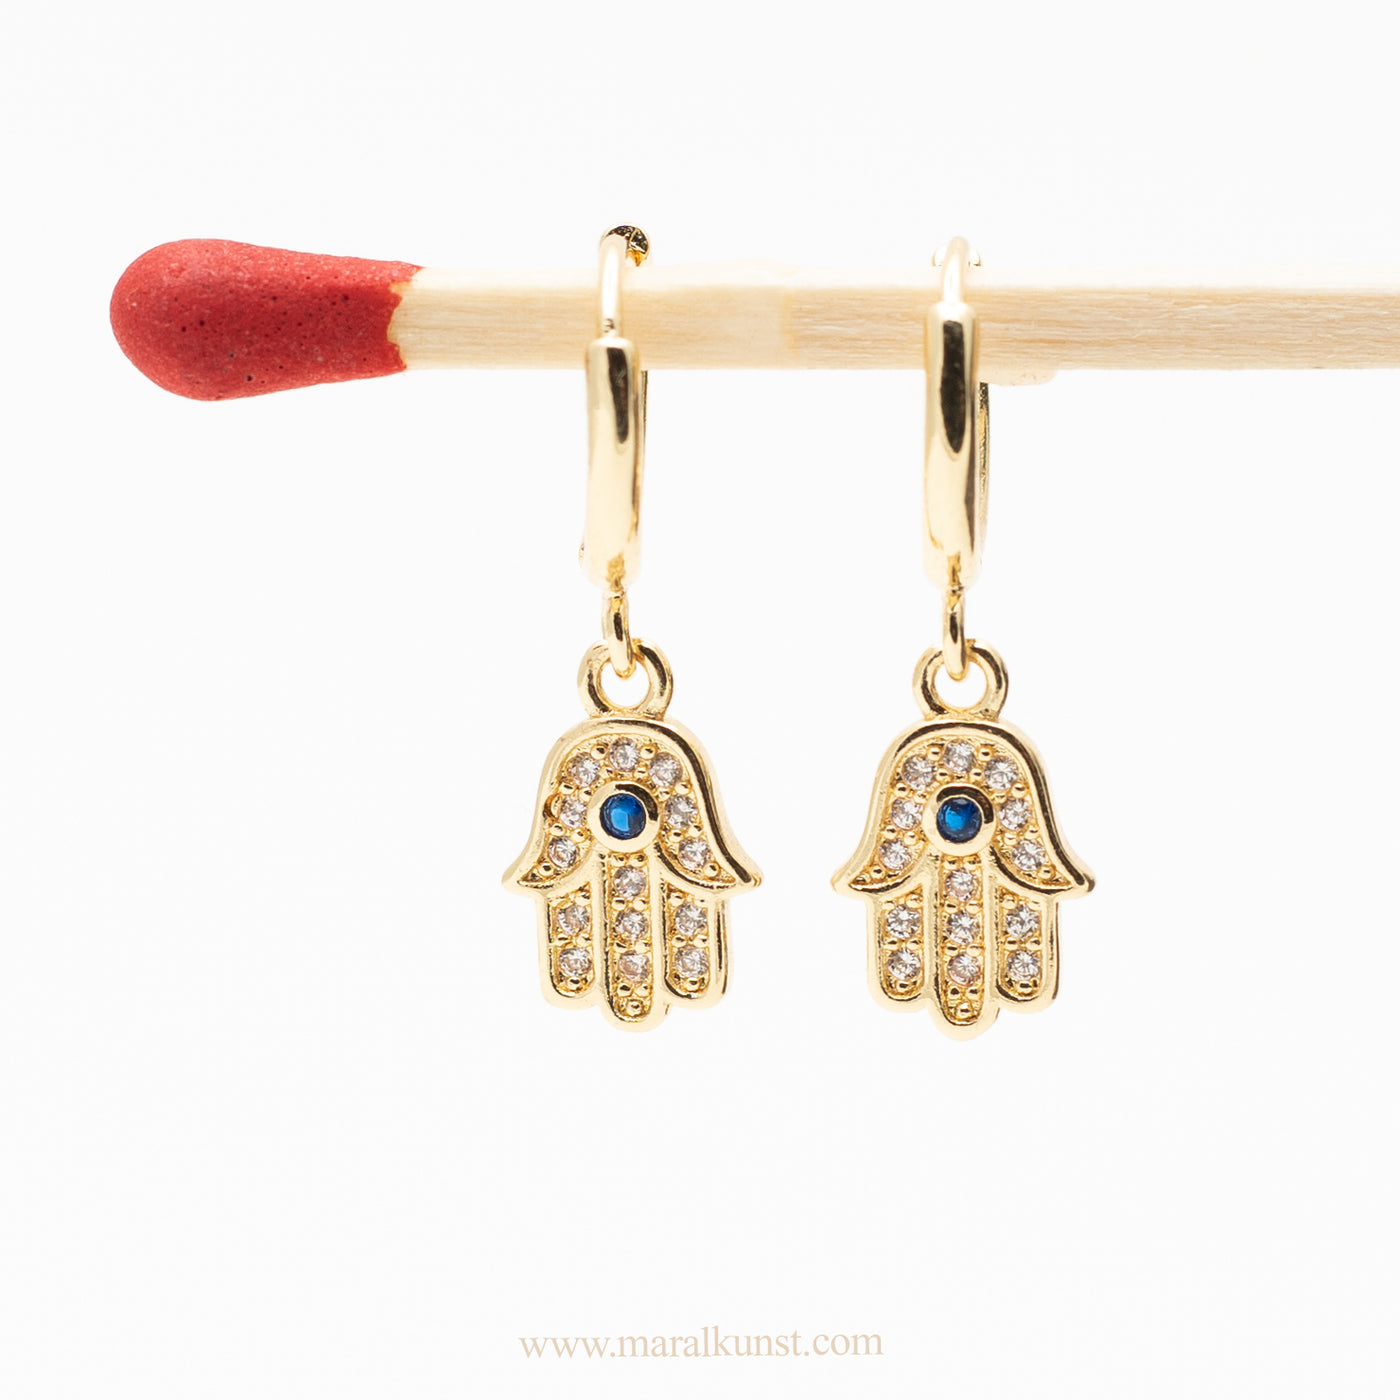 a pair of Fatima hand shape earrings are hanging on a matchstick 